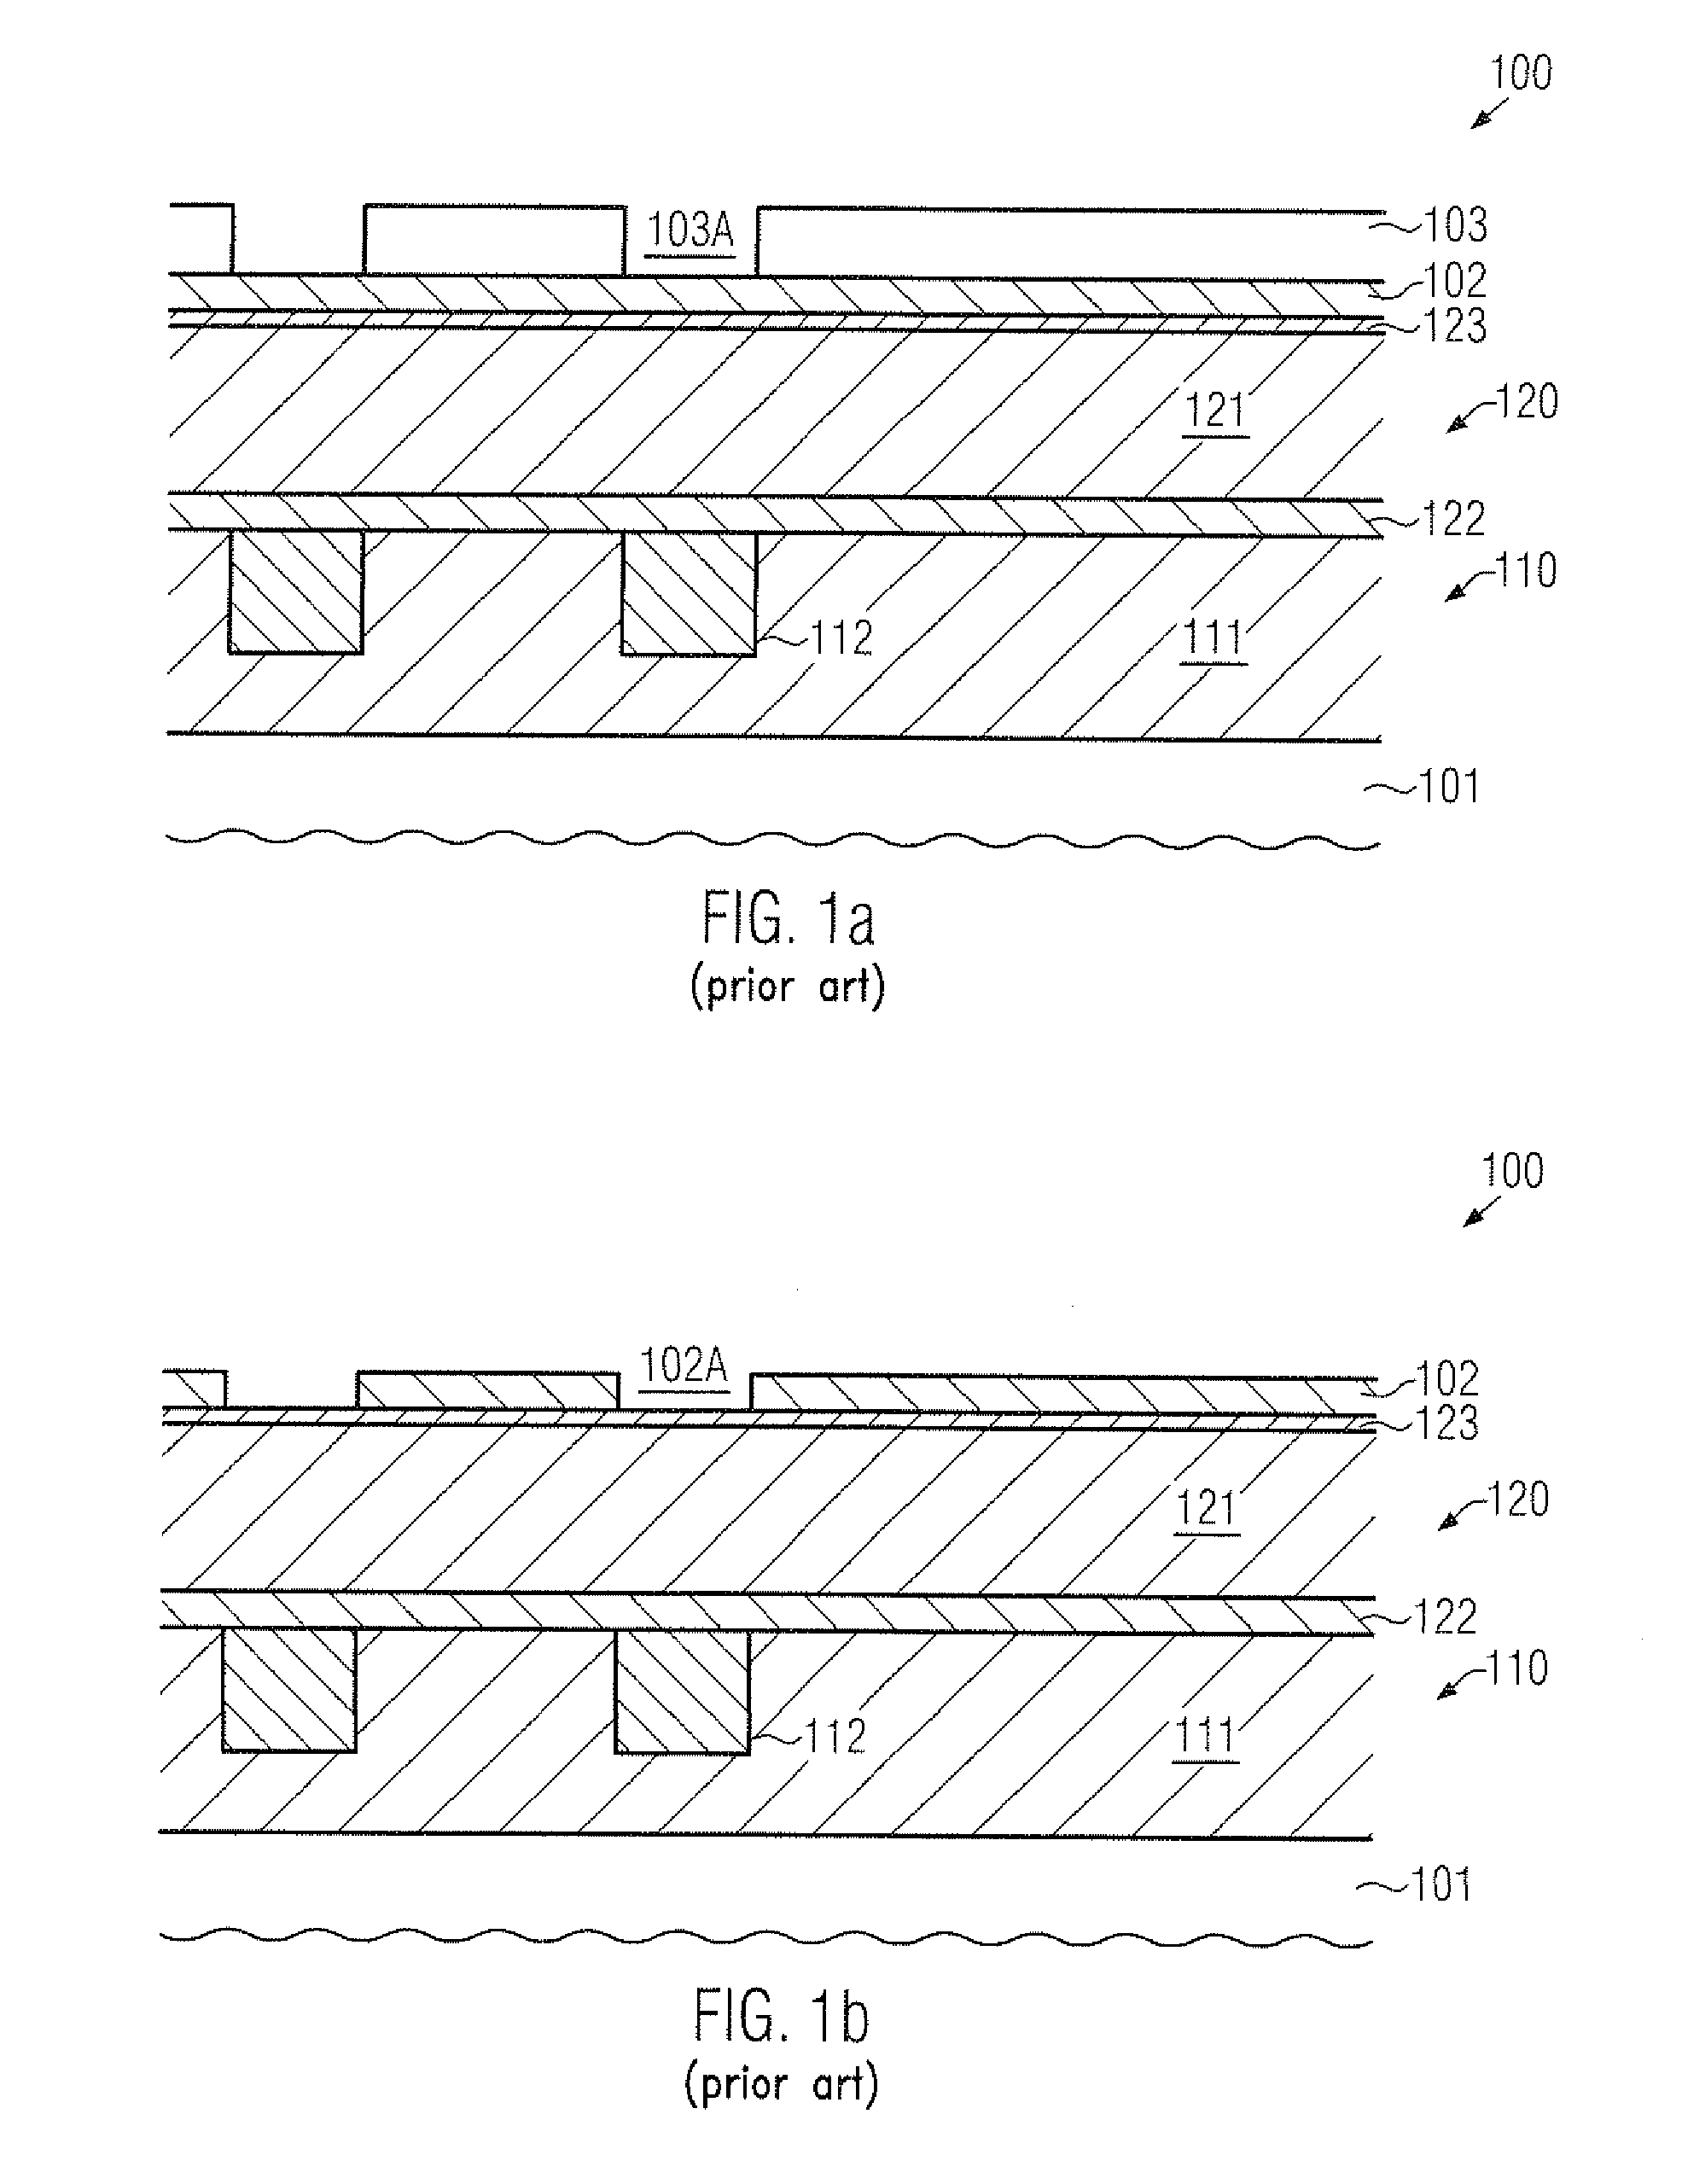 Metallization system of a semiconductor device comprising rounded interconnects formed by hard mask rounding